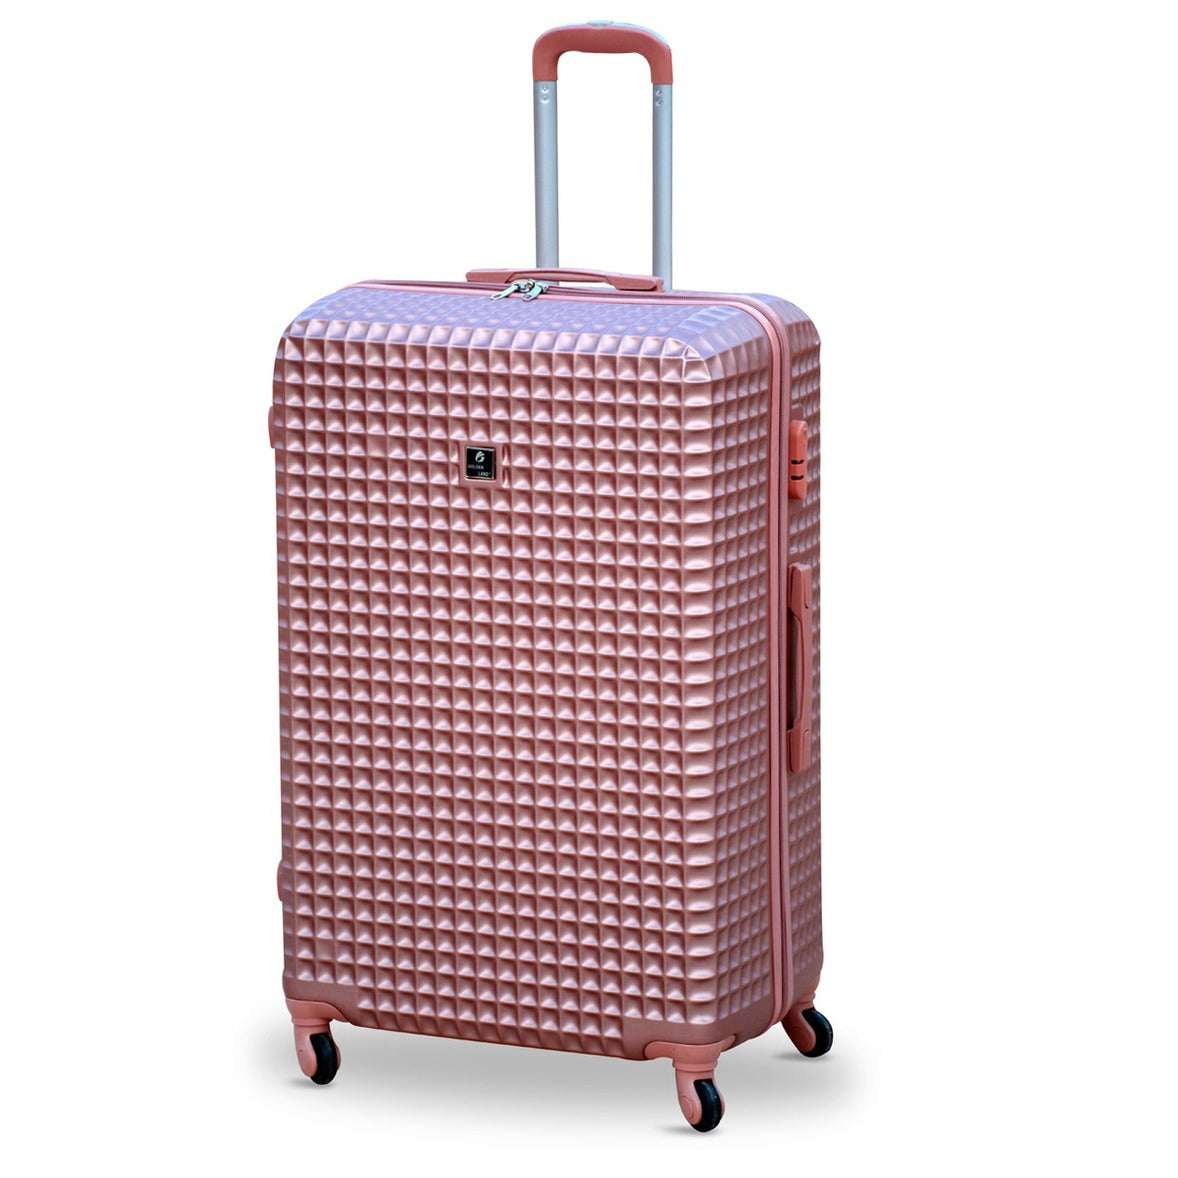 20" Rose Gold Colour Square Cut ABS Lightweight Luggage Hard Case Trolley Bag | 2 Year Warranty